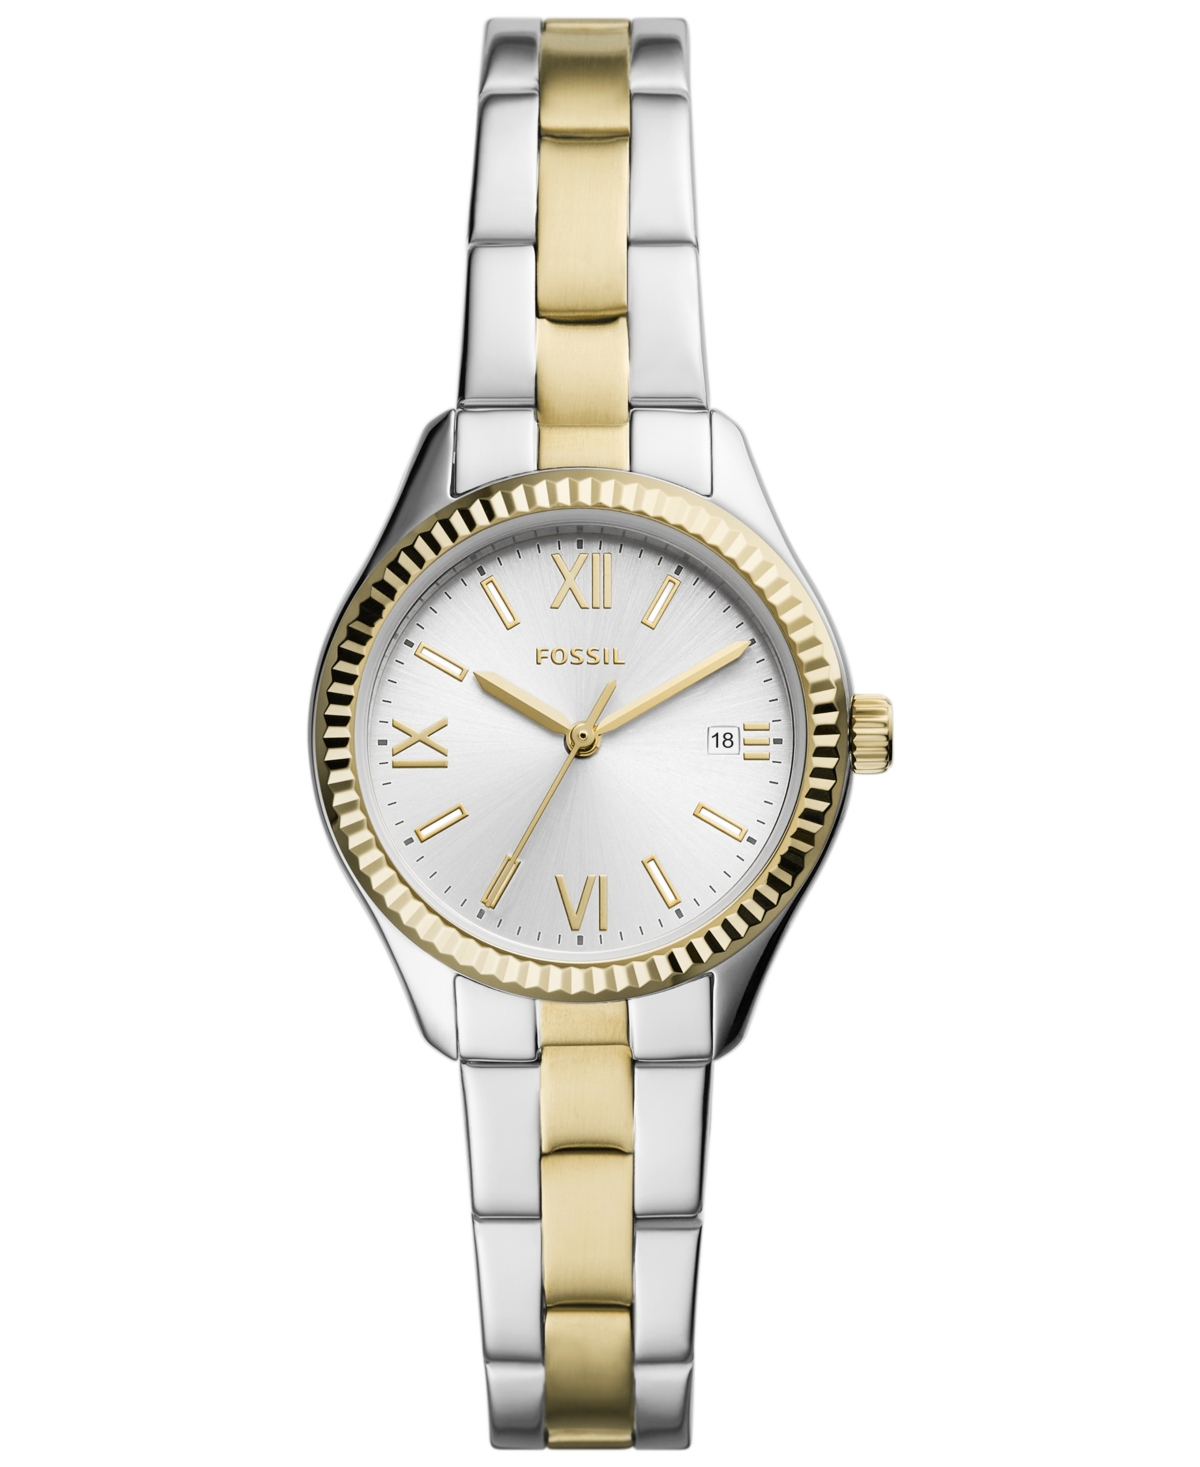 Fossil Women's Rye Three-hand Date Two-tone Stainless Steel Watch, 30mm